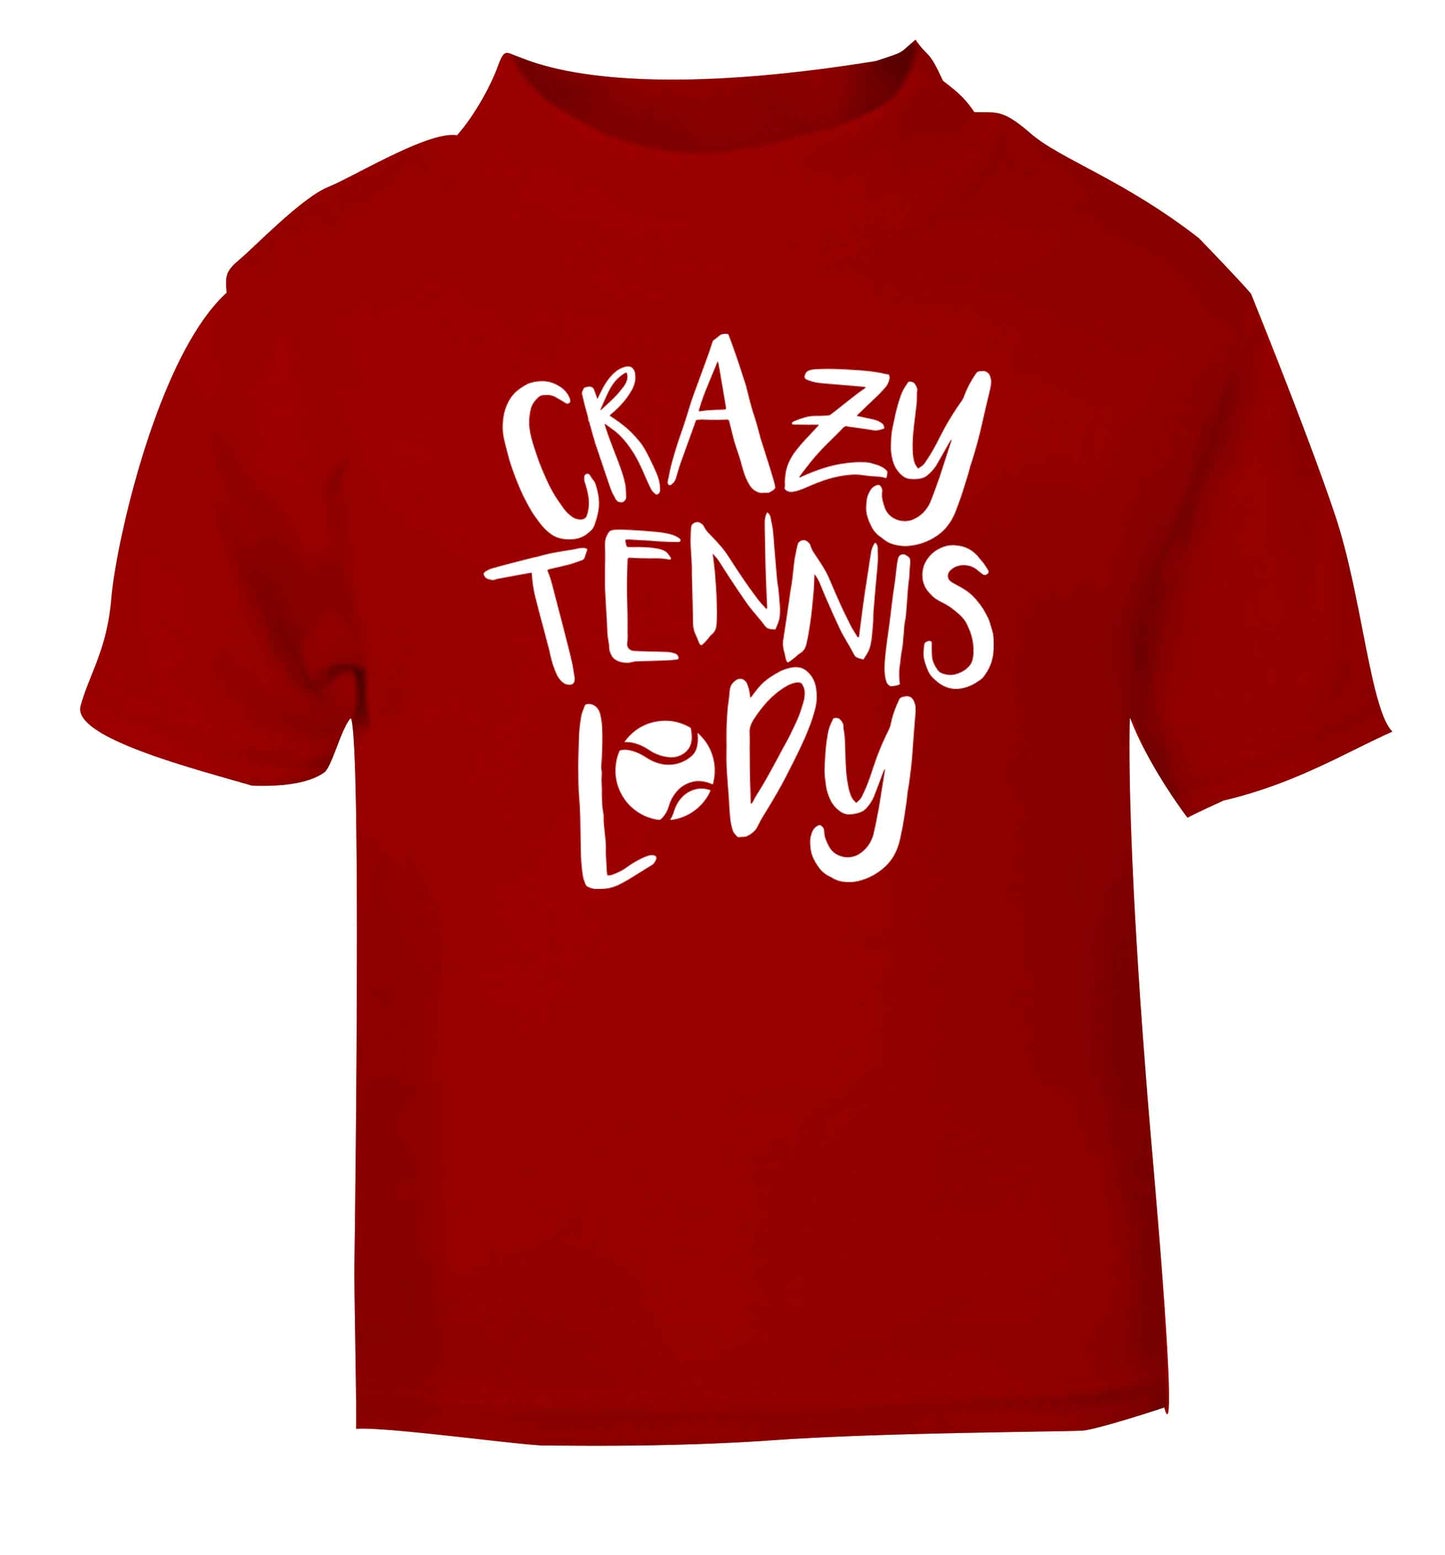 Crazy tennis lady red Baby Toddler Tshirt 2 Years